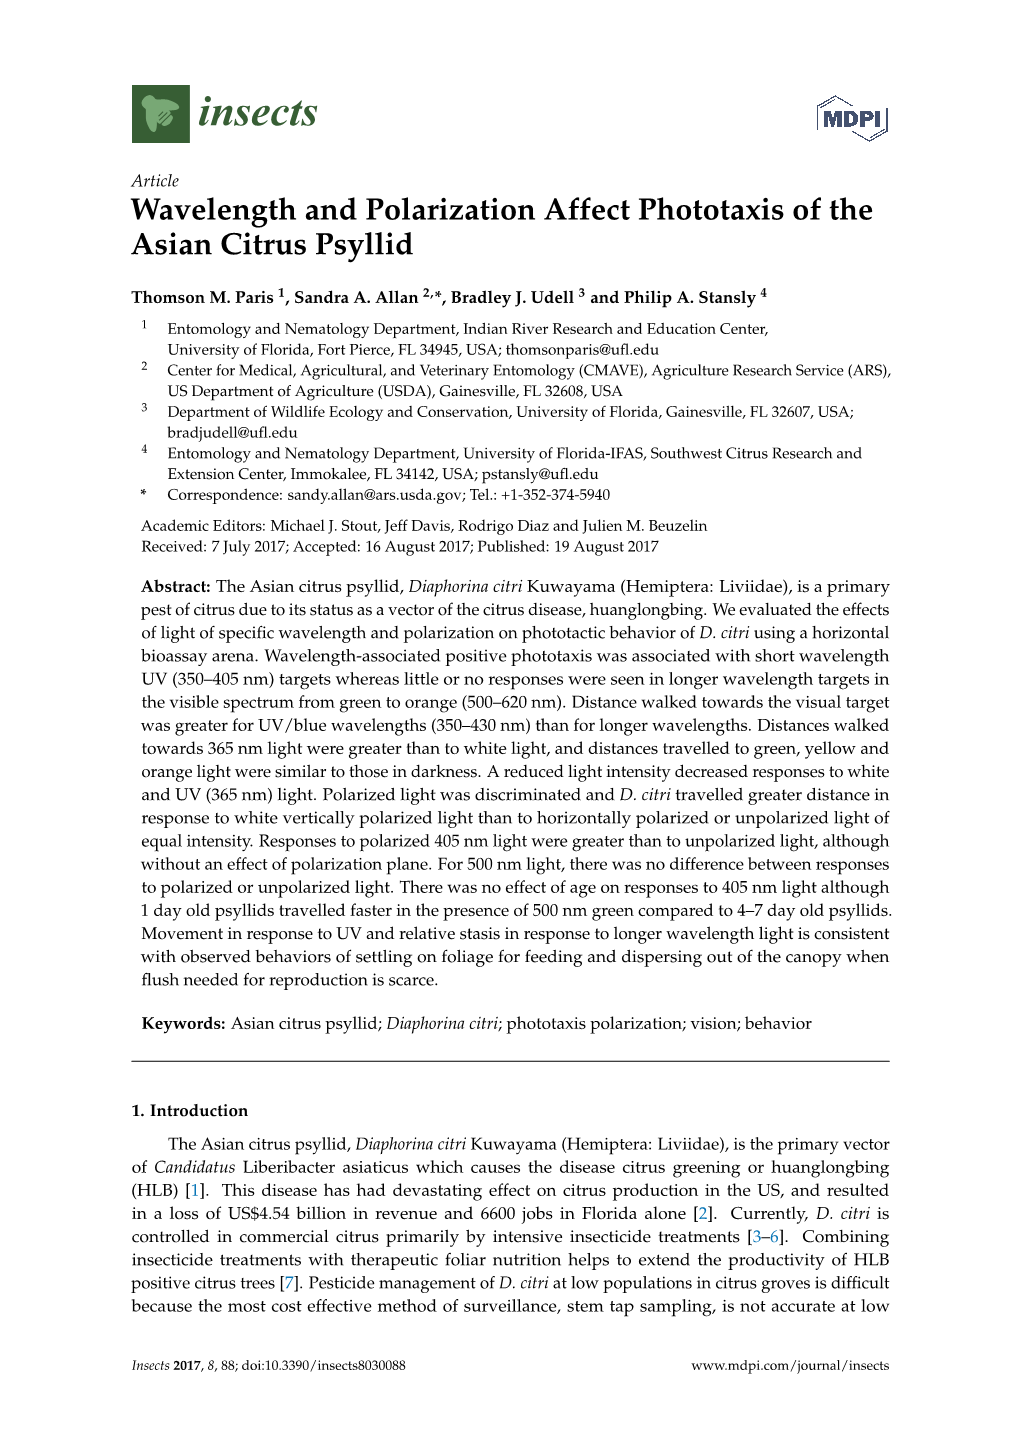 Wavelength and Polarization Affect Phototaxis of the Asian Citrus Psyllid